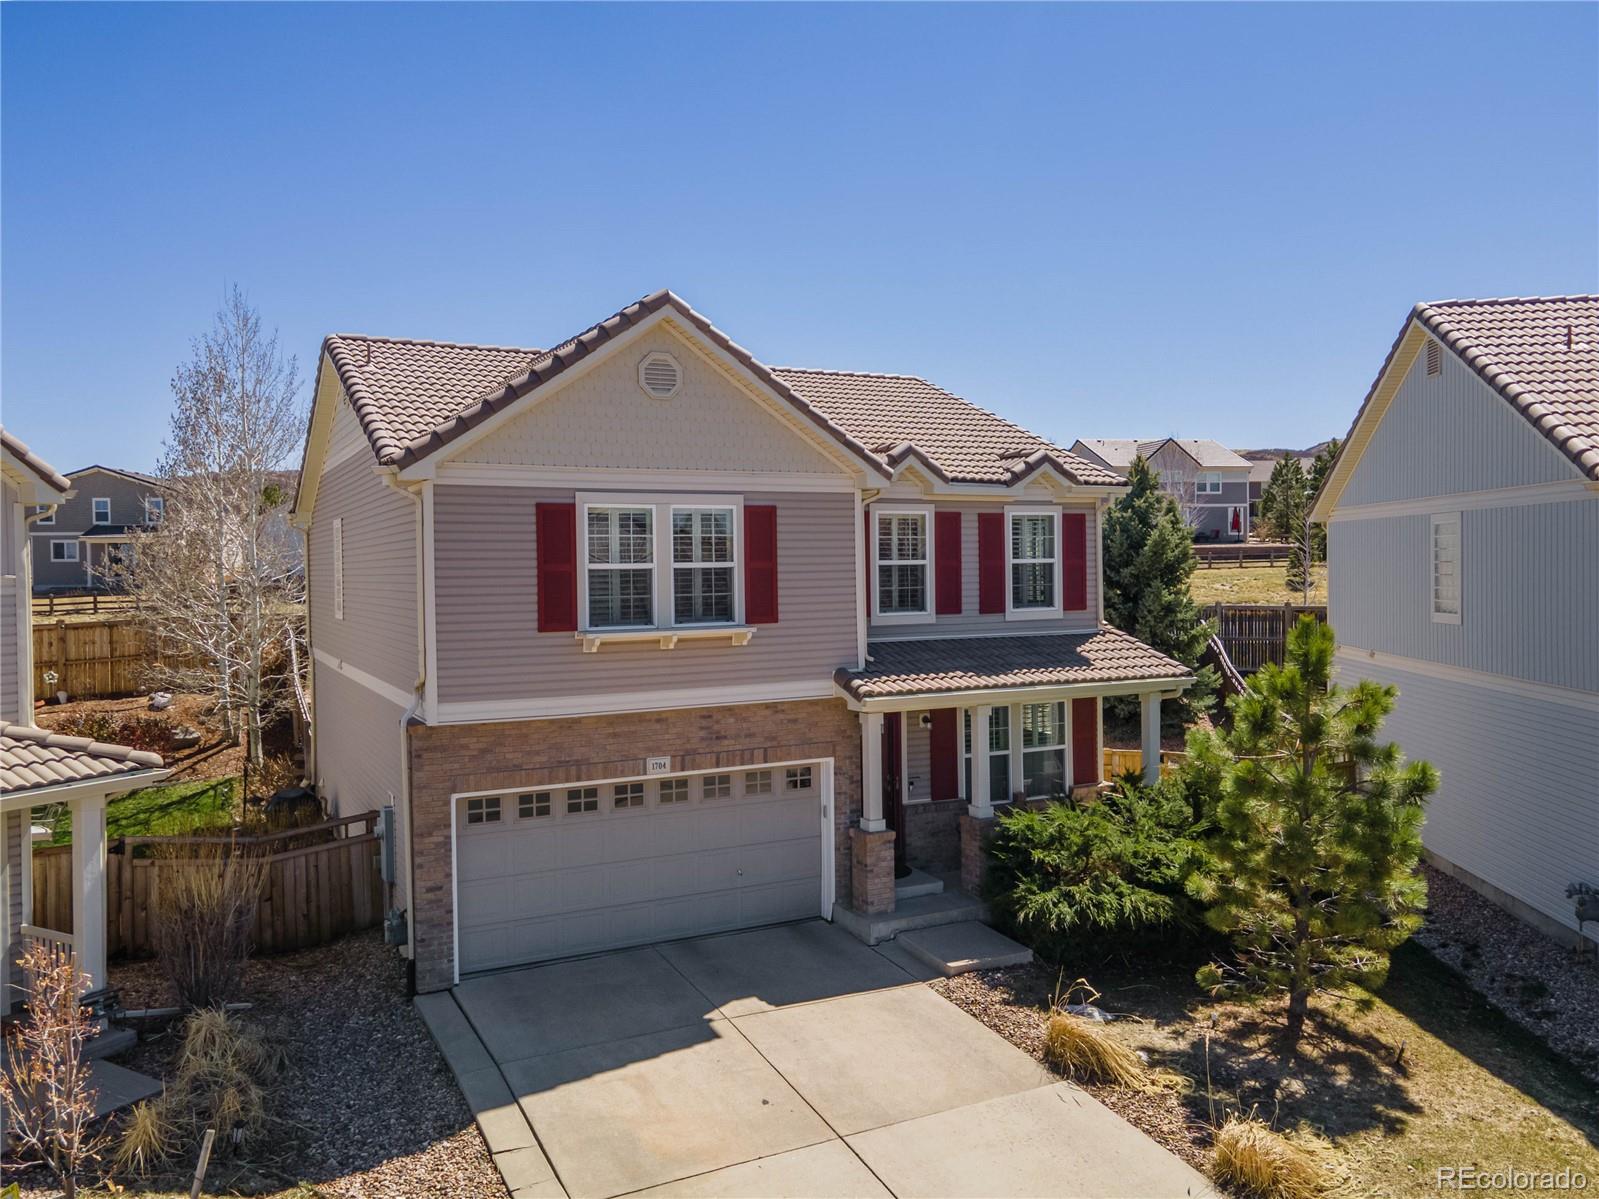 1704  quartz street, castle rock sold home. Closed on 2024-05-13 for $605,000.